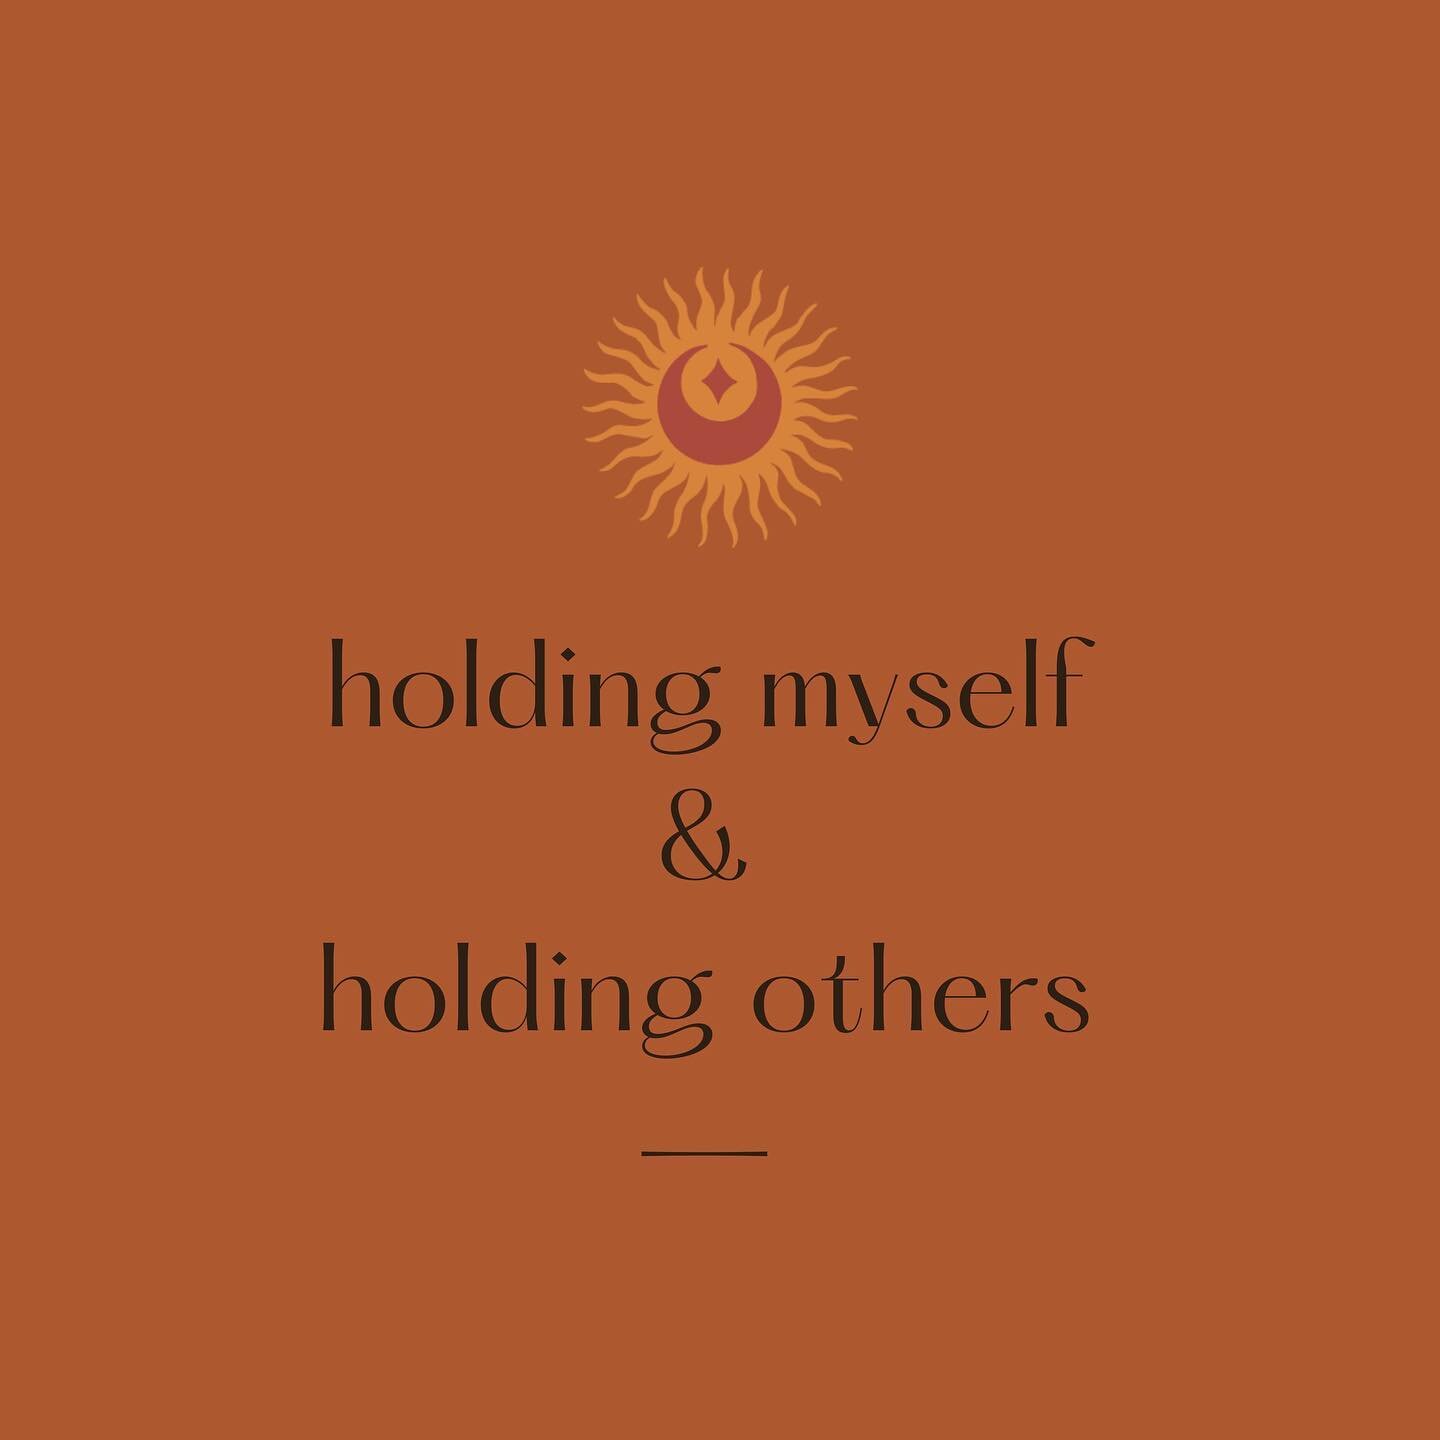 What does it mean to hold myself &amp; others capable and able? 

What would change if I was able to do so?

Contemplating this has brought forth some deep shifts in me over the past while, and continues to weave into my awareness. It has prompted a 